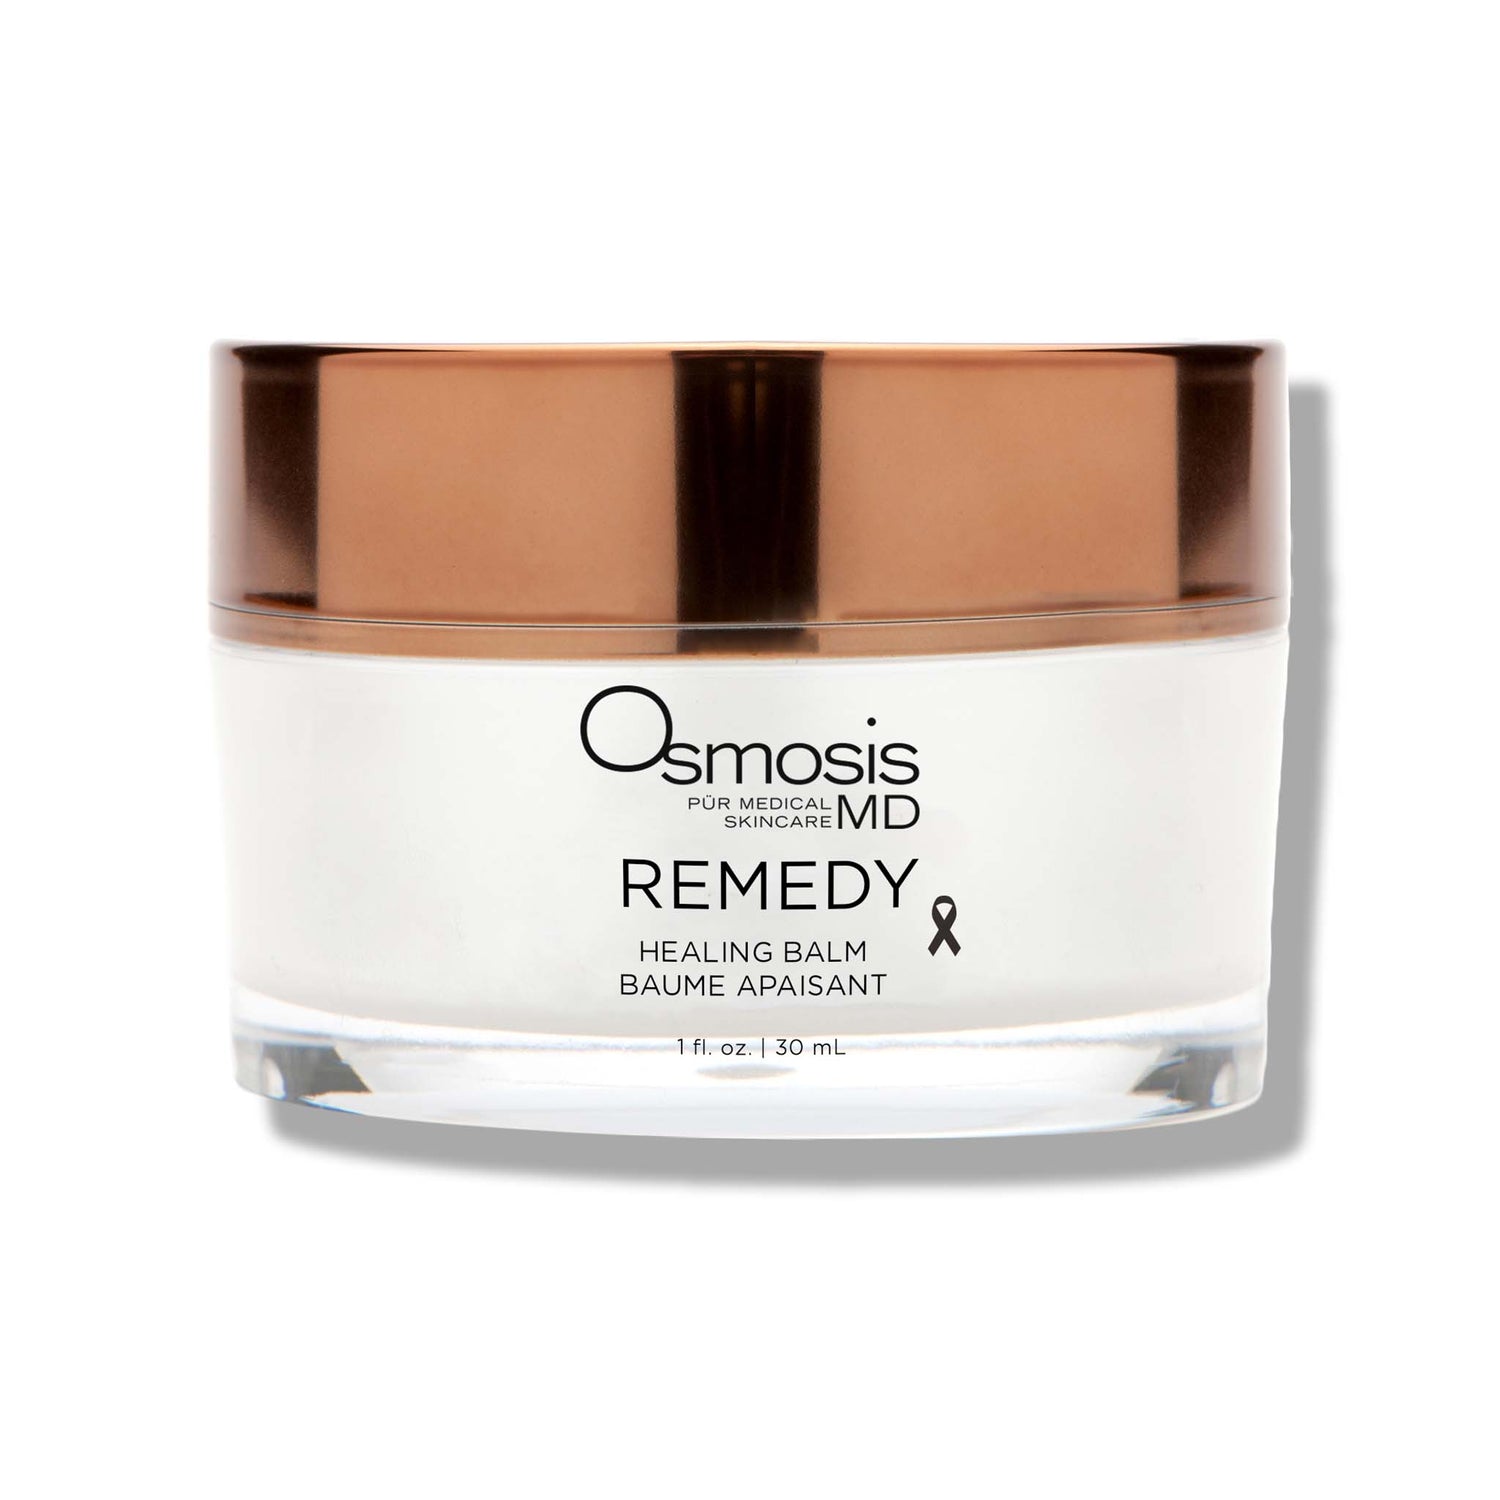 Osmosis Skincare MD Remedy Healing Balm provides faster recovery to any wound as well as intense hydration.